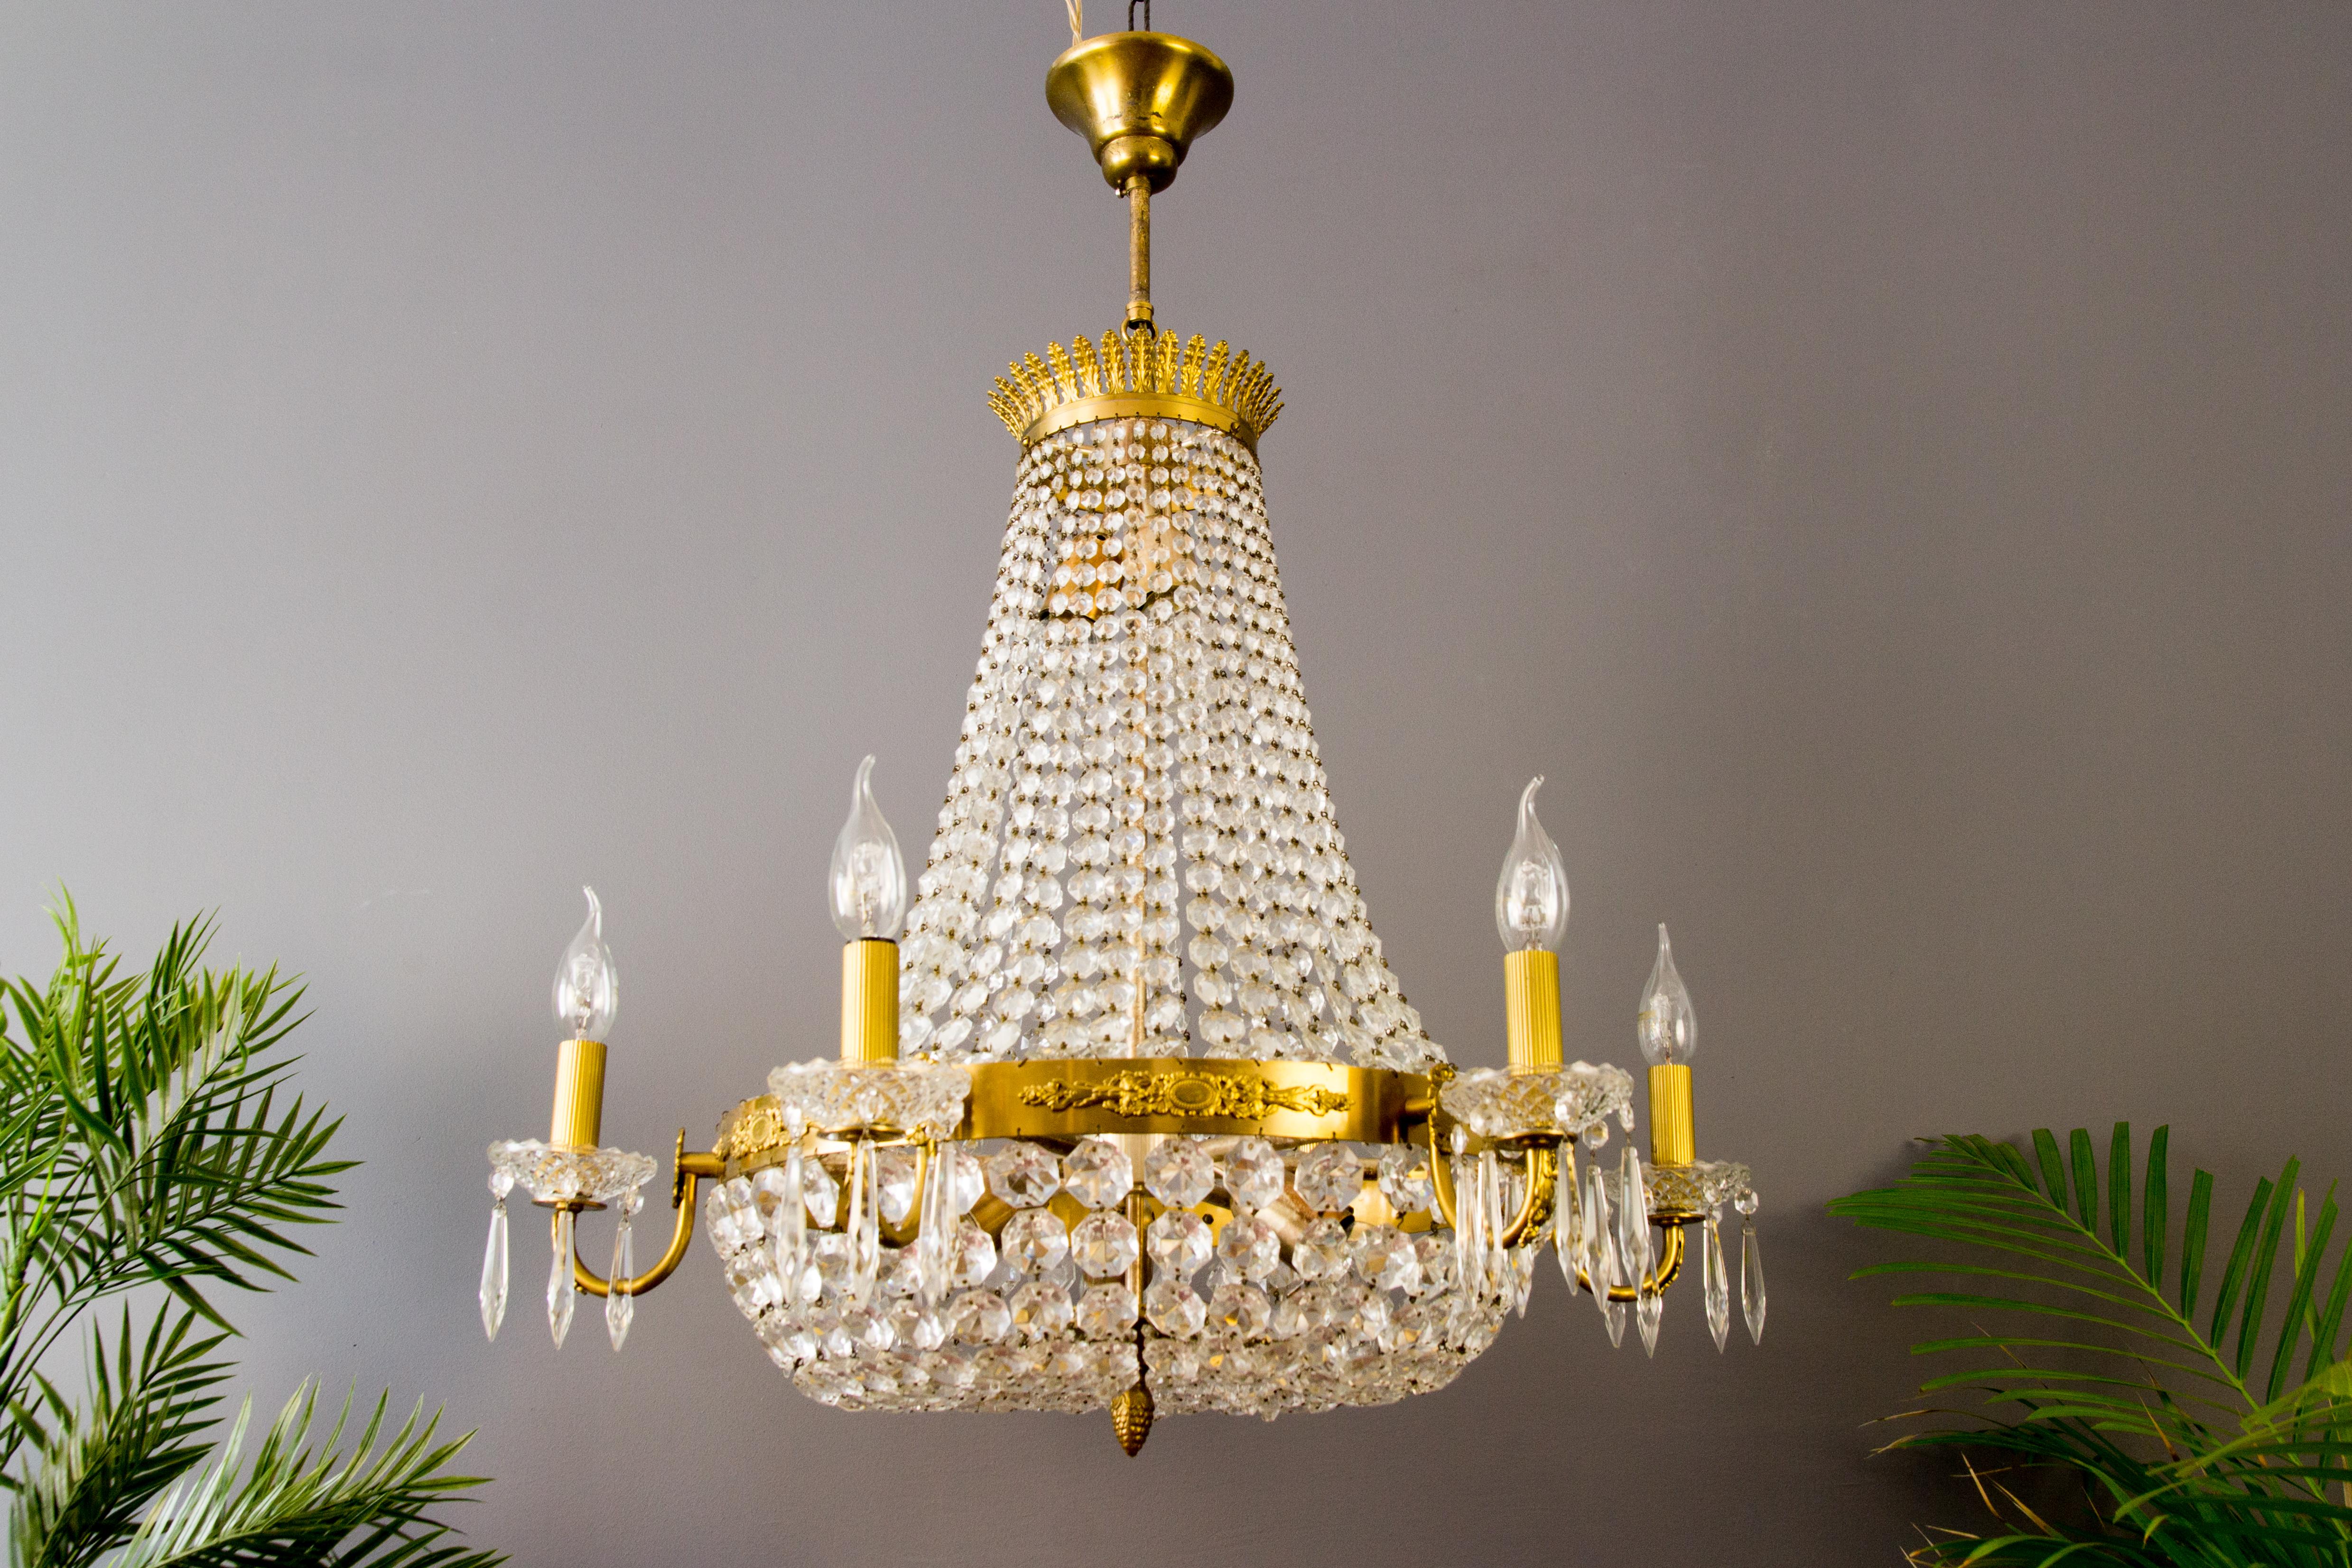 French Empire style crystal, brass, and bronze basket chandelier with six arms; brass plume castings adorn the top of the chandelier and bronze decors around the ring of the basket.
Each arm has an E14 socket with new wiring and bobeches made of